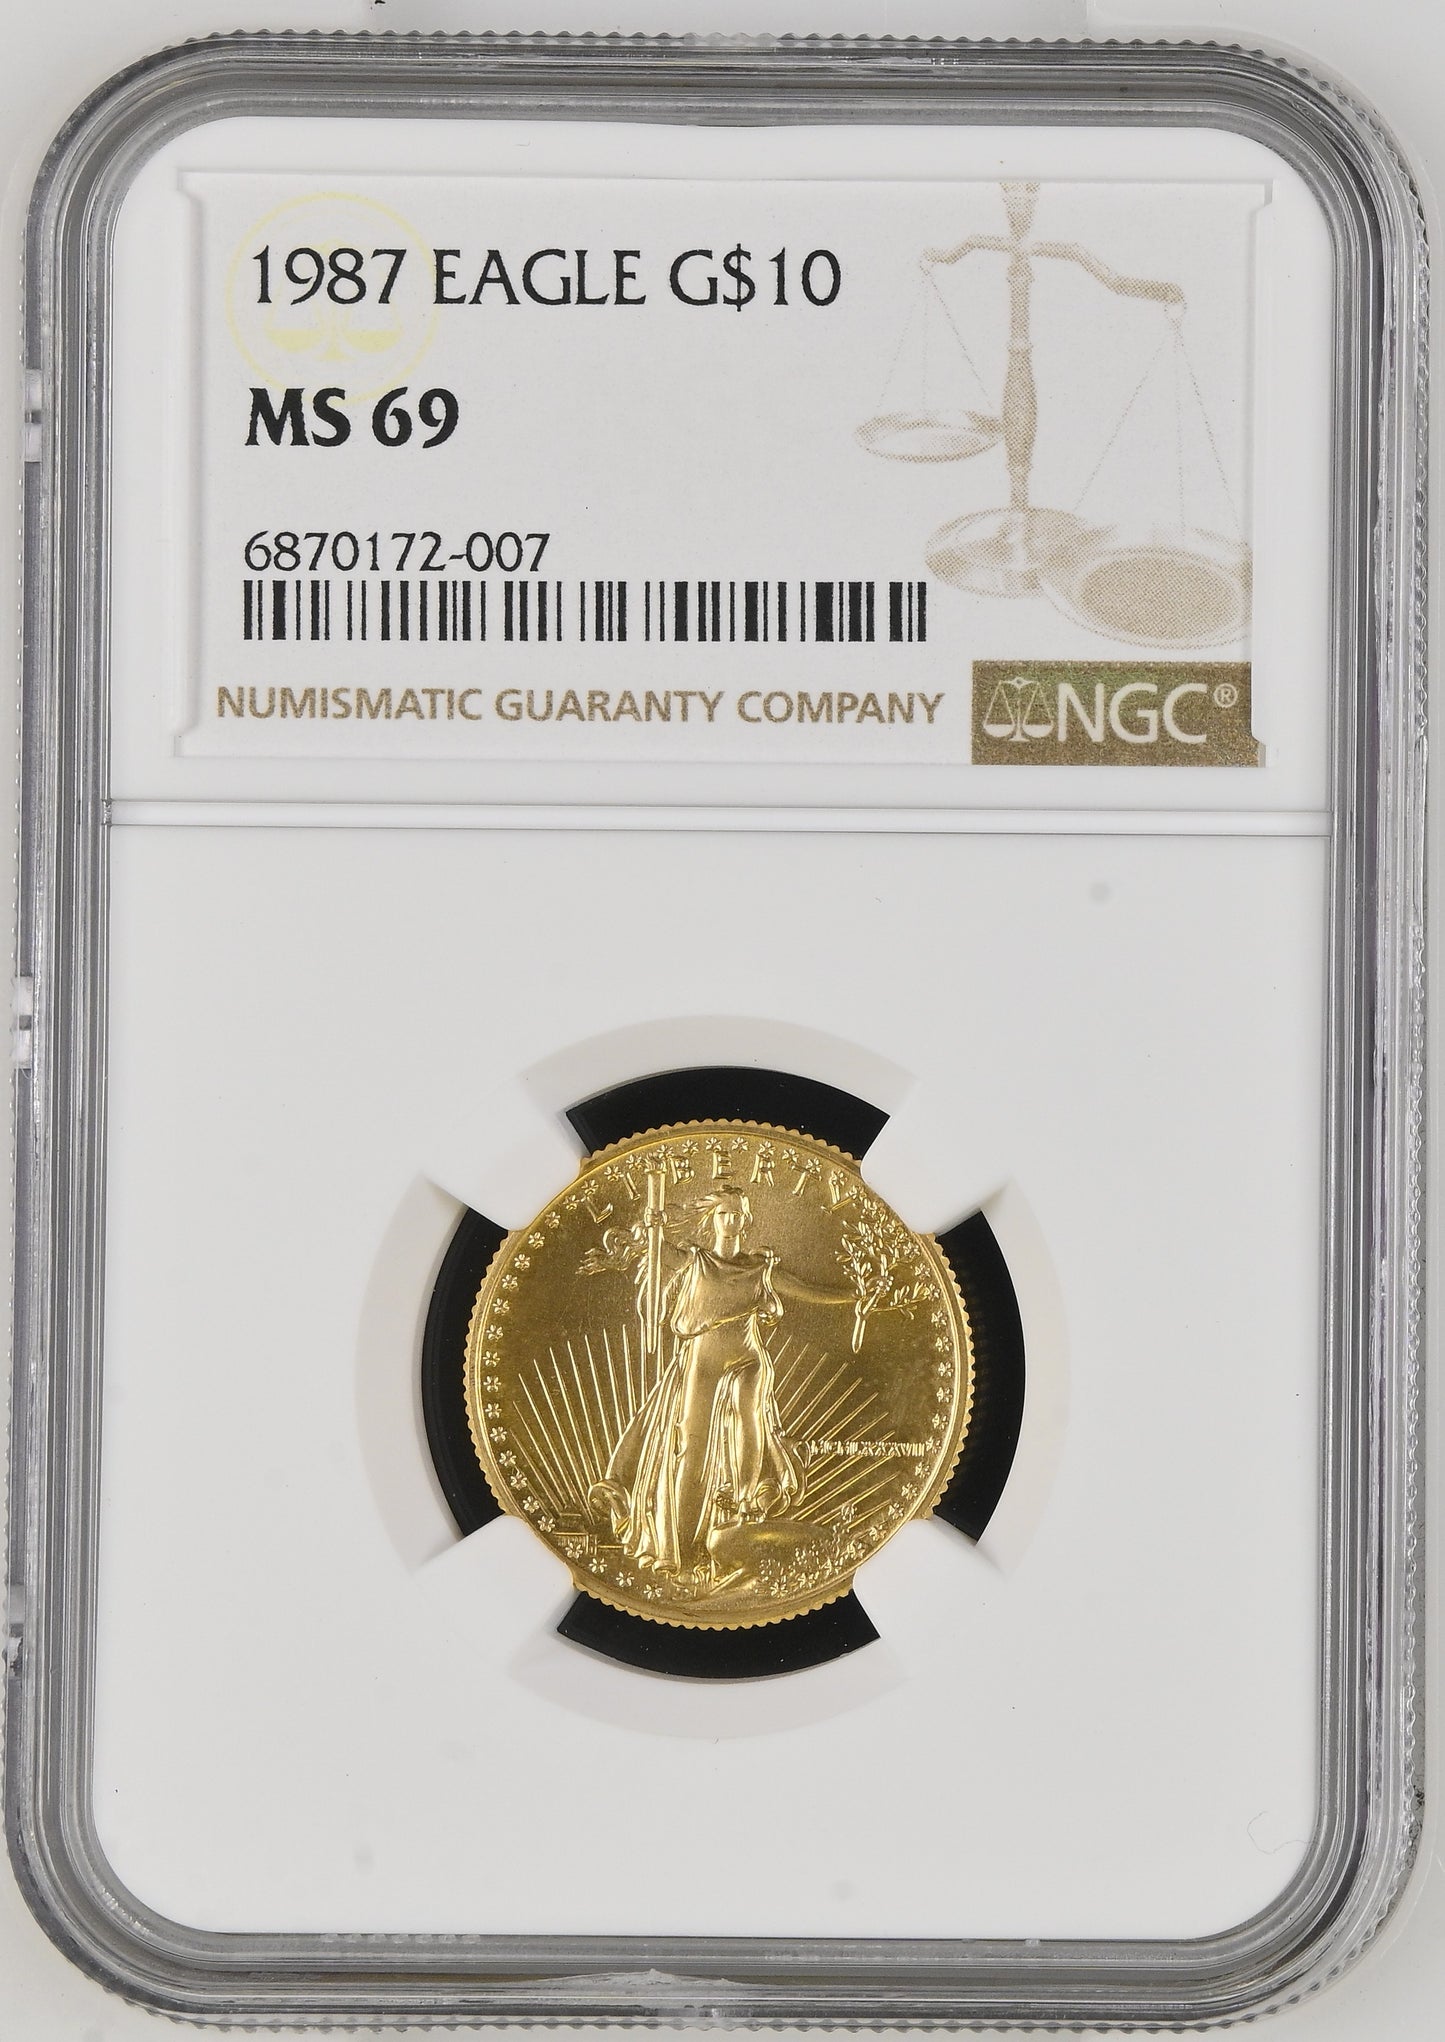 1987 1/4 oz Gold American Eagle 10$ Bullion Gold Coin - NGC MS 69